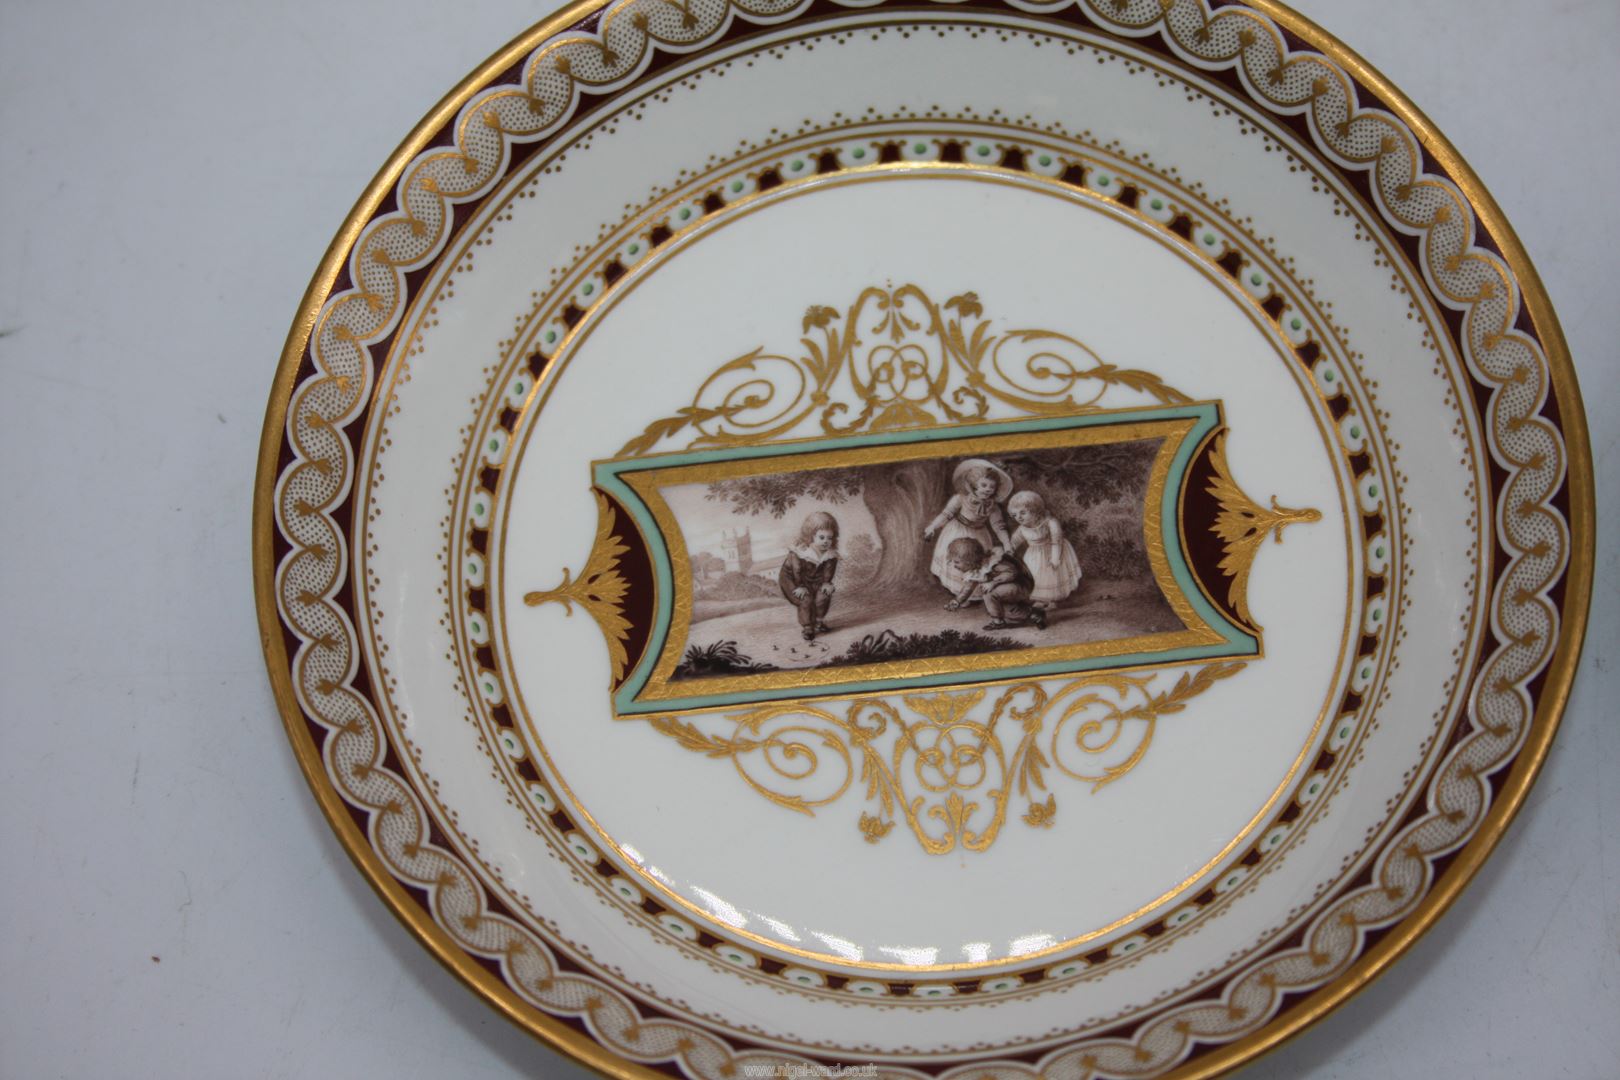 Two highly decorated Vienna porcelain Saucers, one having a scene of children playing, - Image 2 of 4